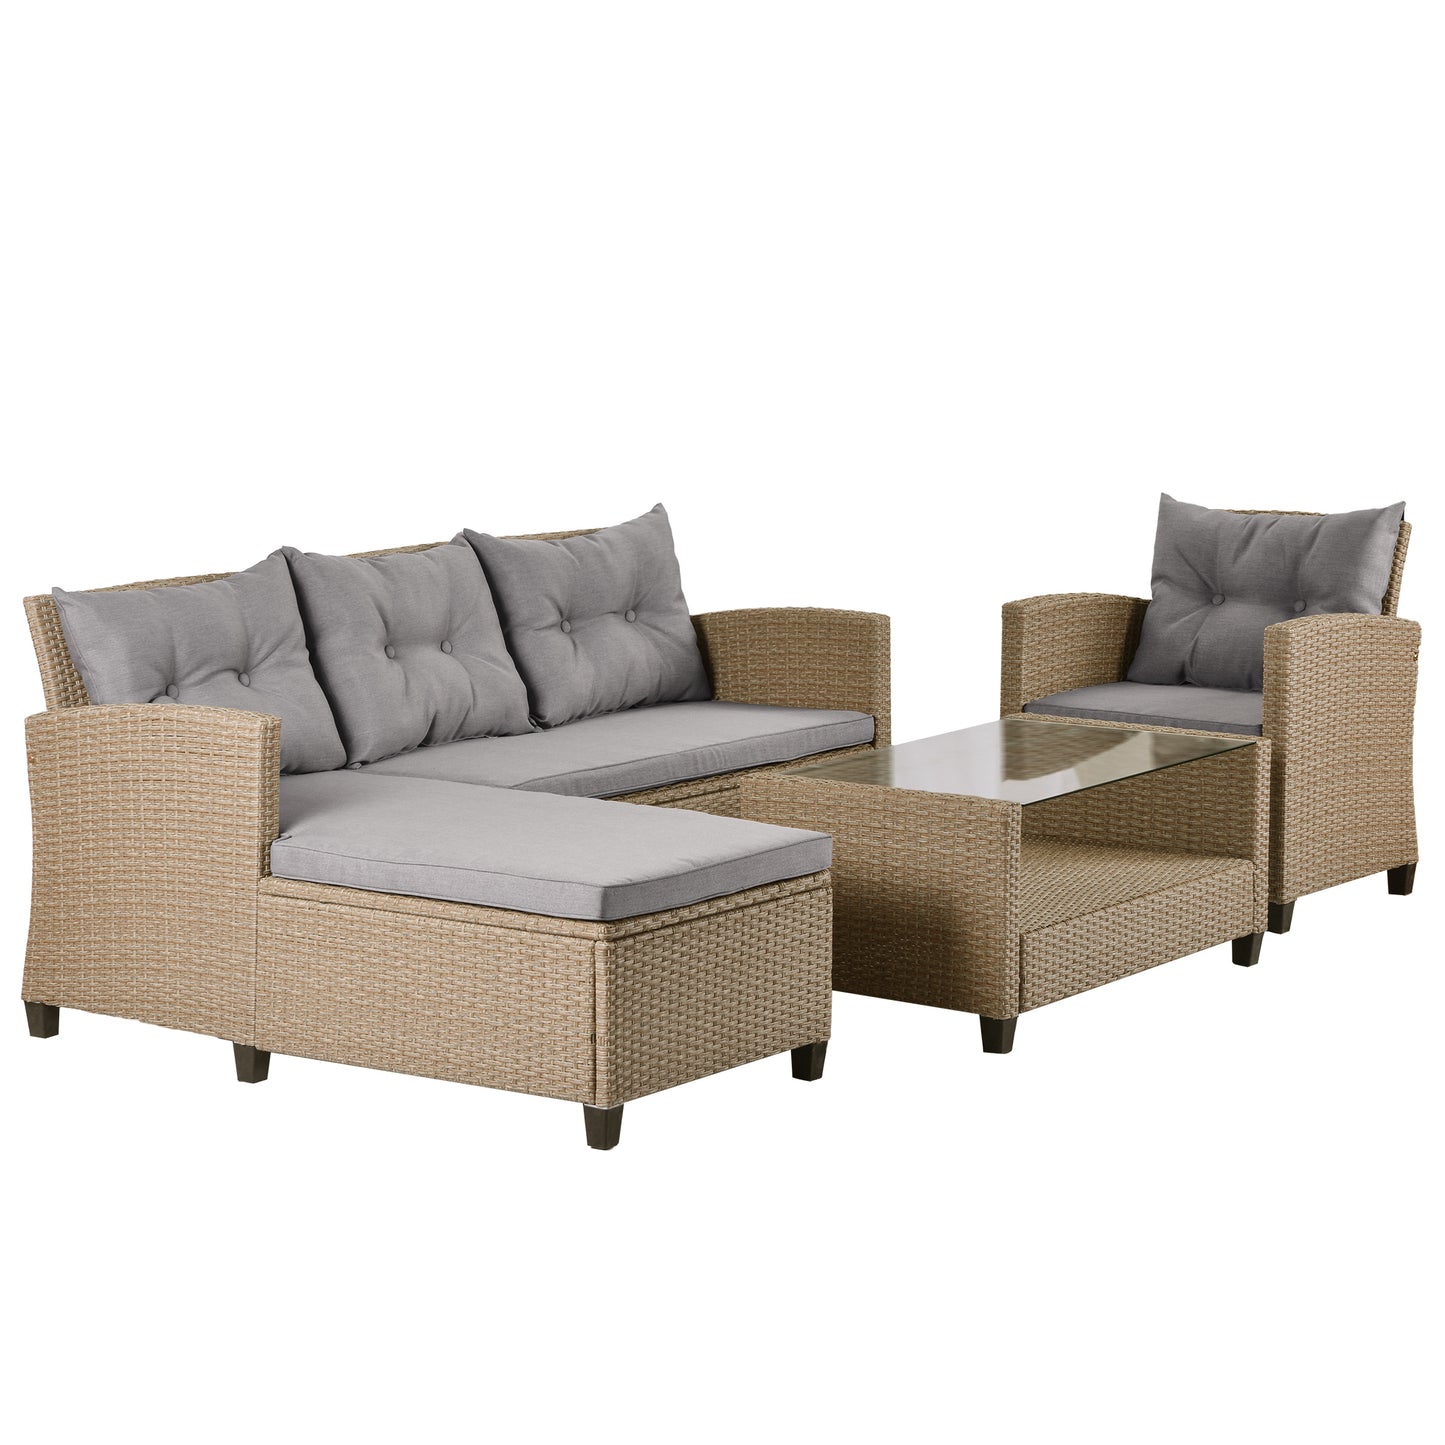 Outdoor, Patio Furniture Sets, 4 Piece Conversation Set Wicker Ratten Sectional Sofa with Seat Cushions (Beige Brown)